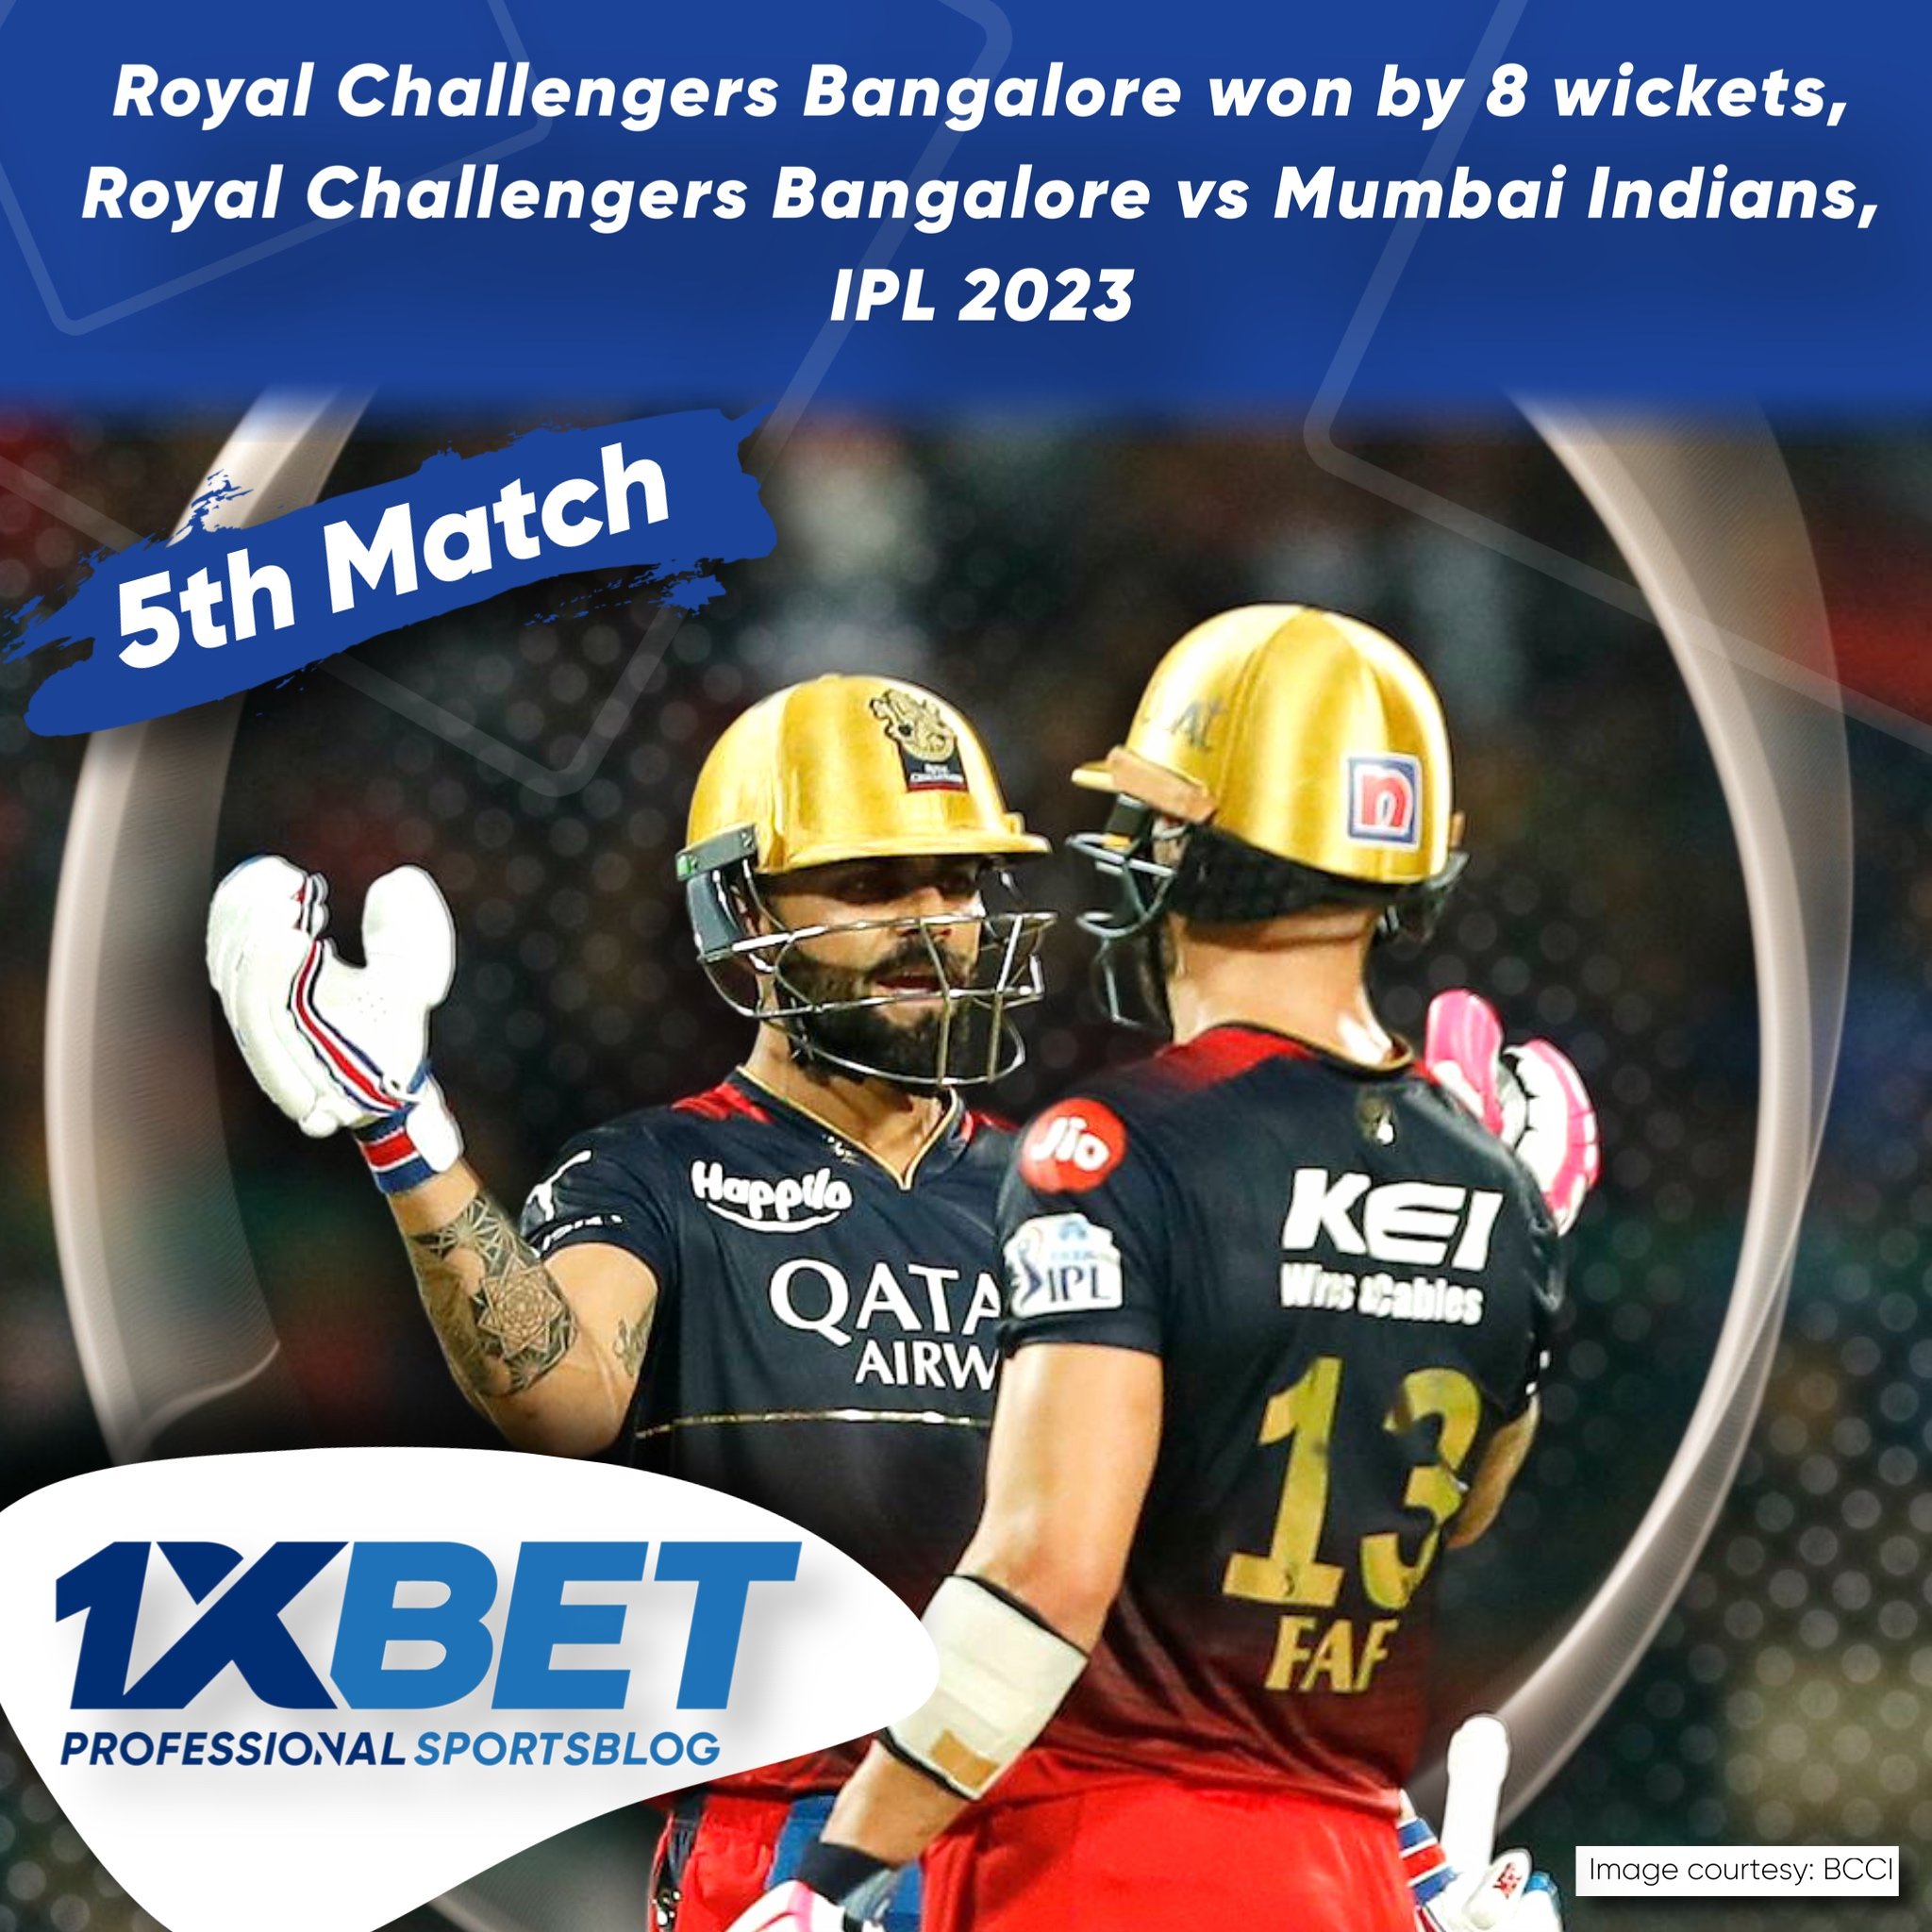 Royal Challengers Bangalore won by 8 wickets